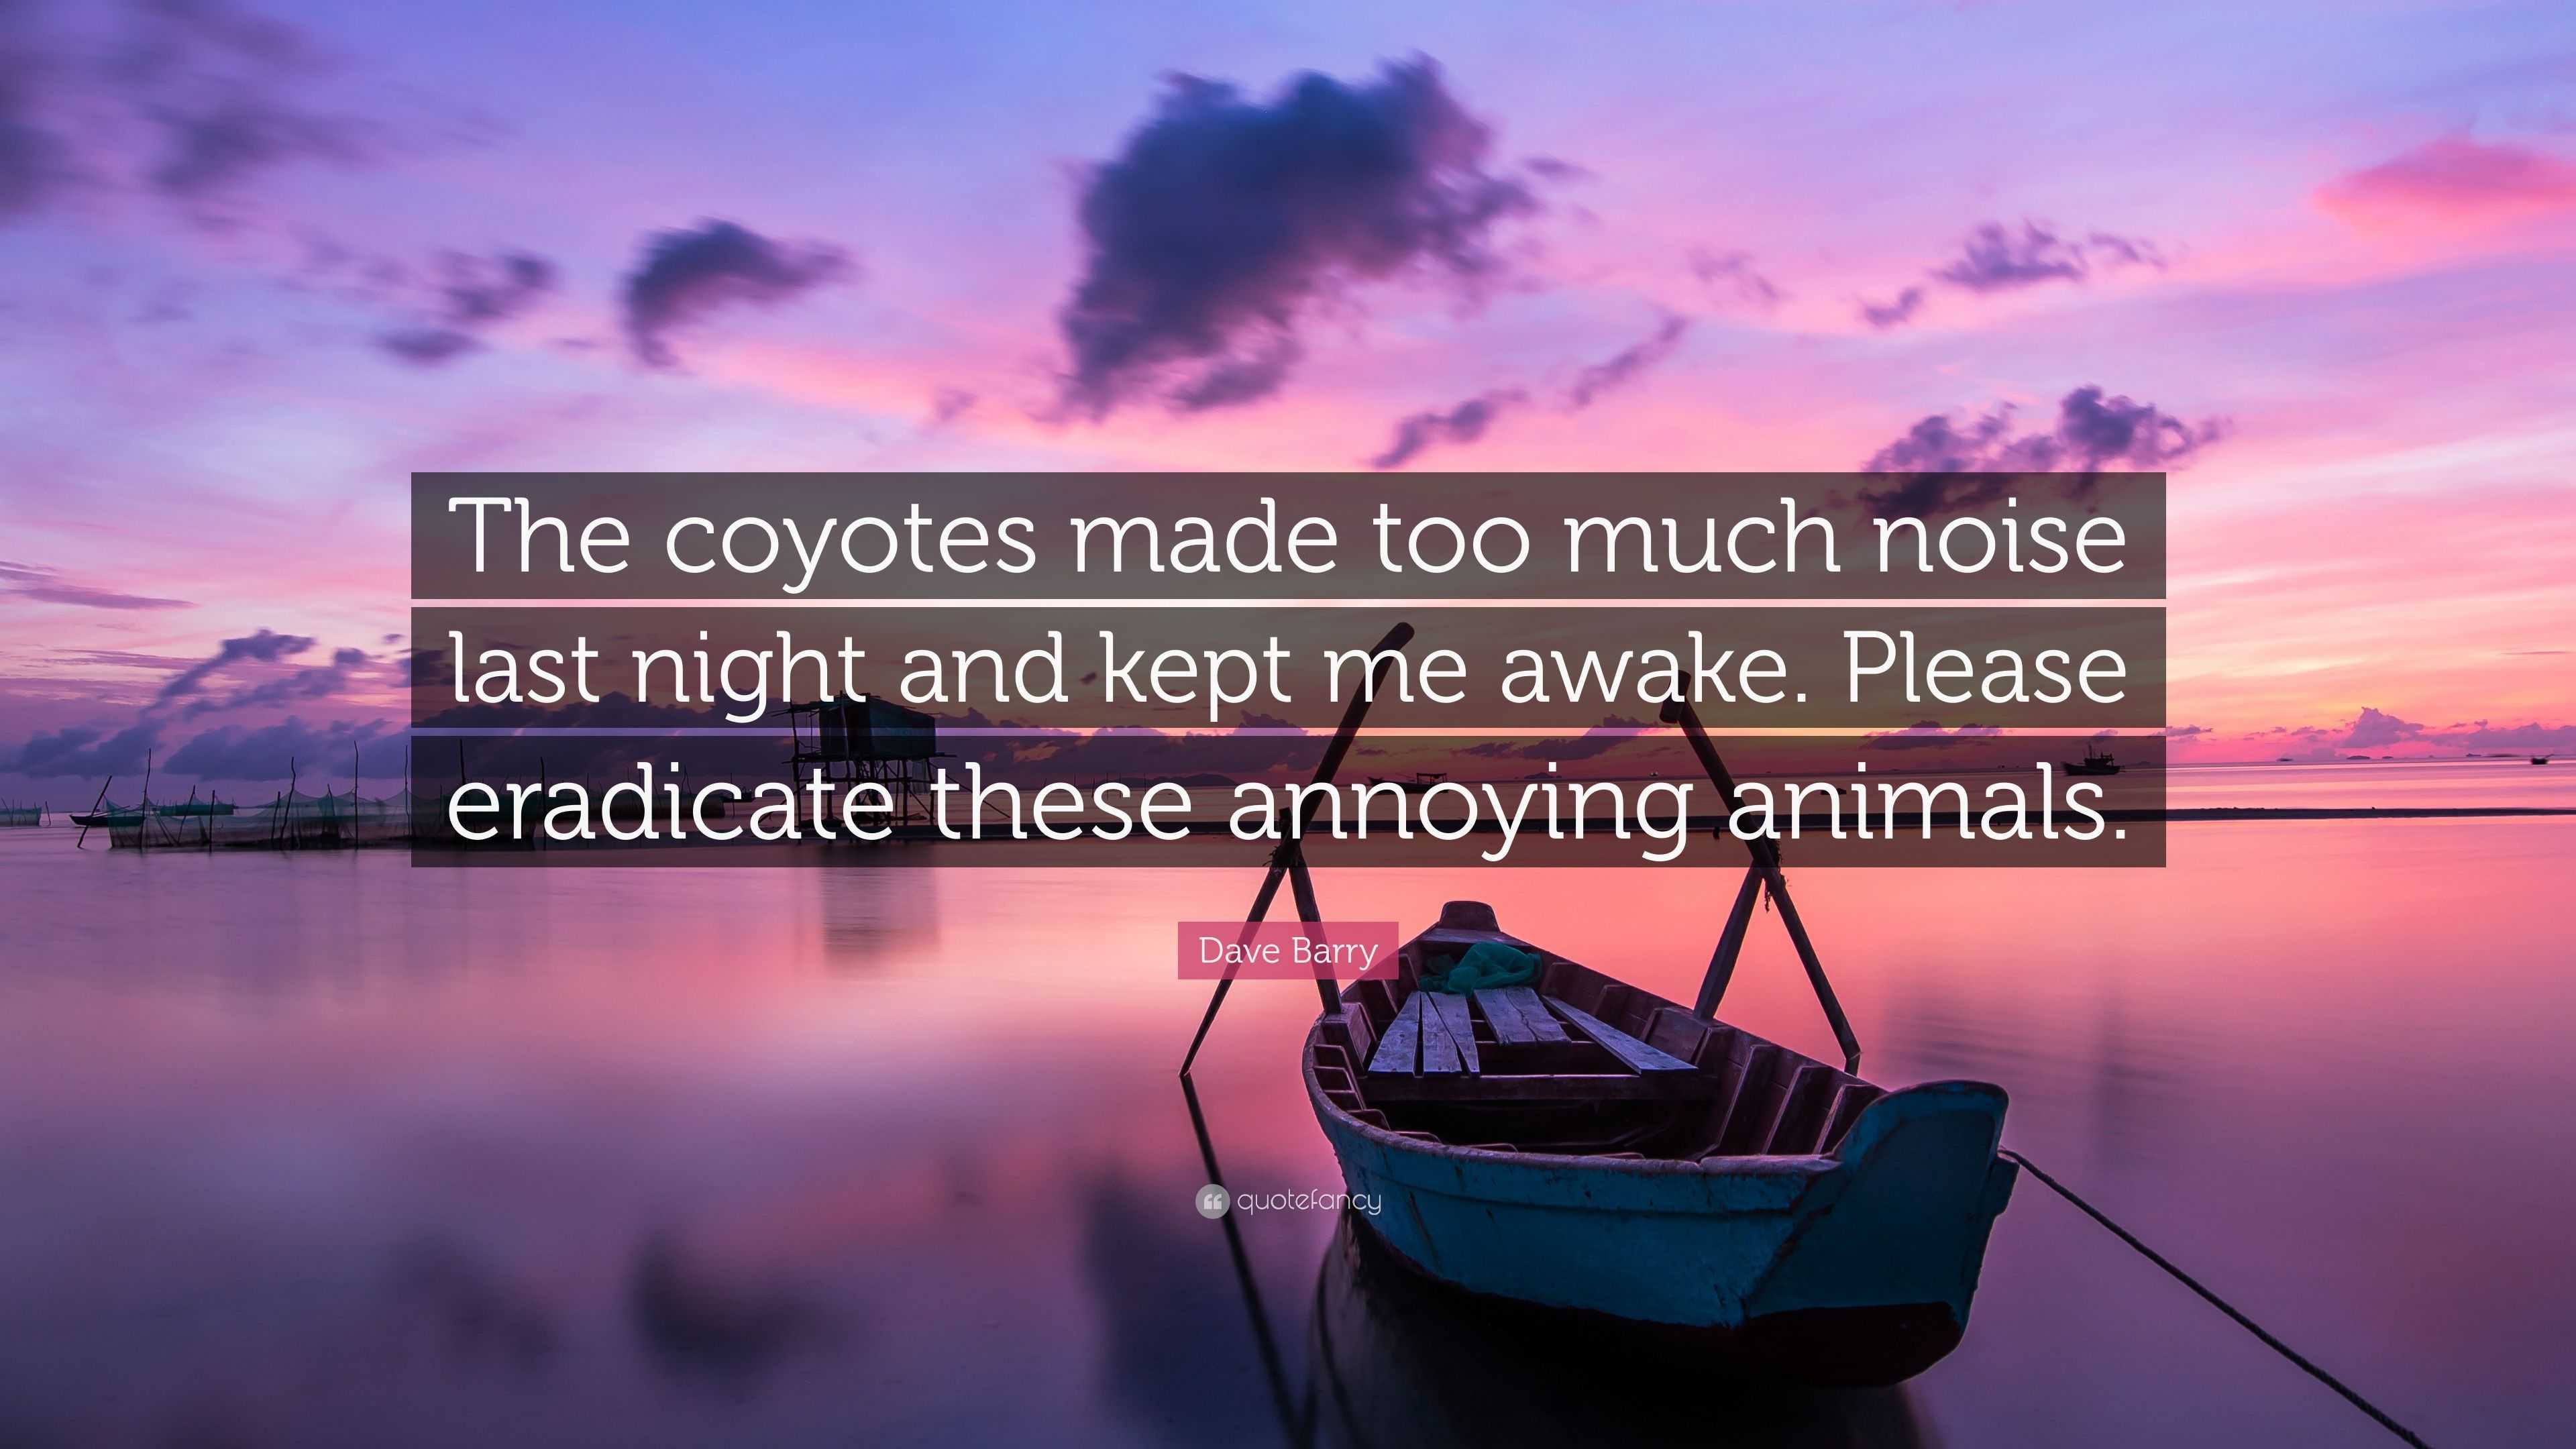 Dave Barry Quote: “The coyotes made too much noise last night and kept me  awake. Please